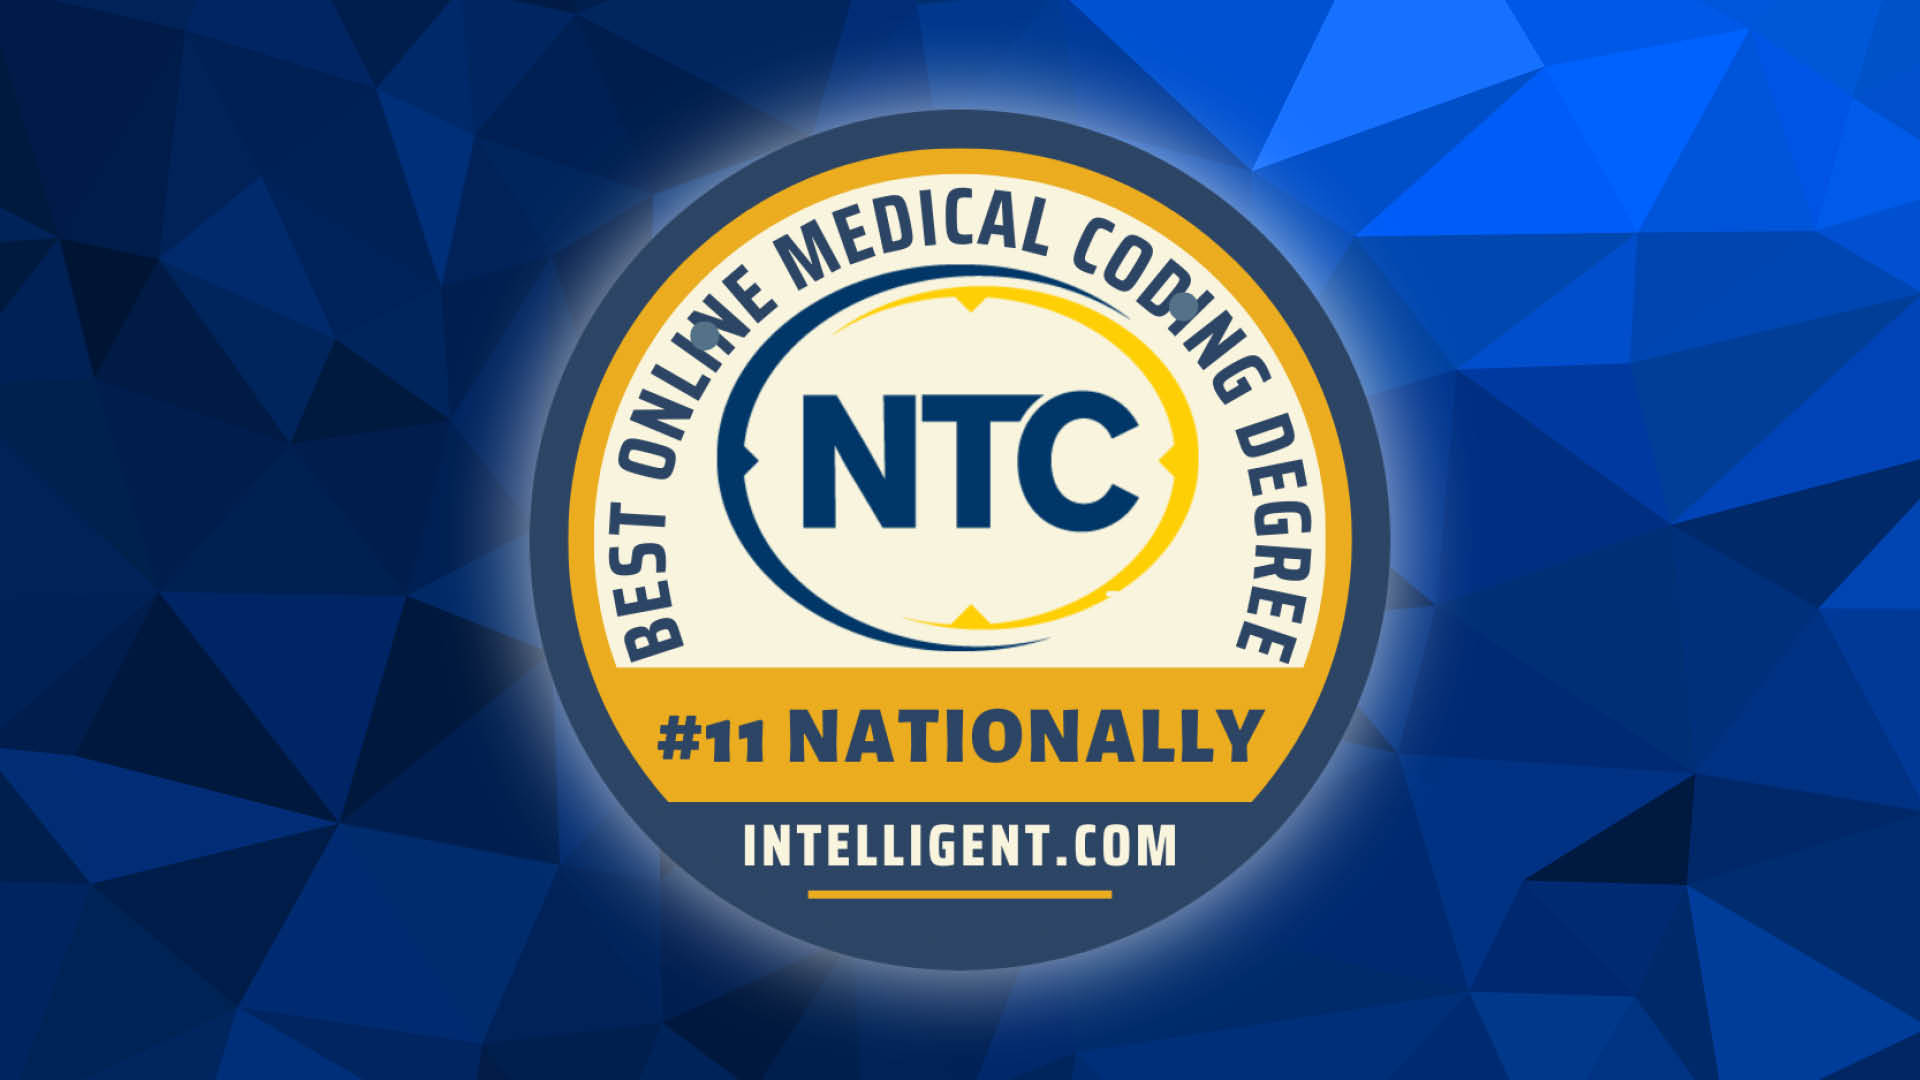 An award badge which reads "Best Online Medical Coding Degree" #11 Nationally, Intelligent.com.